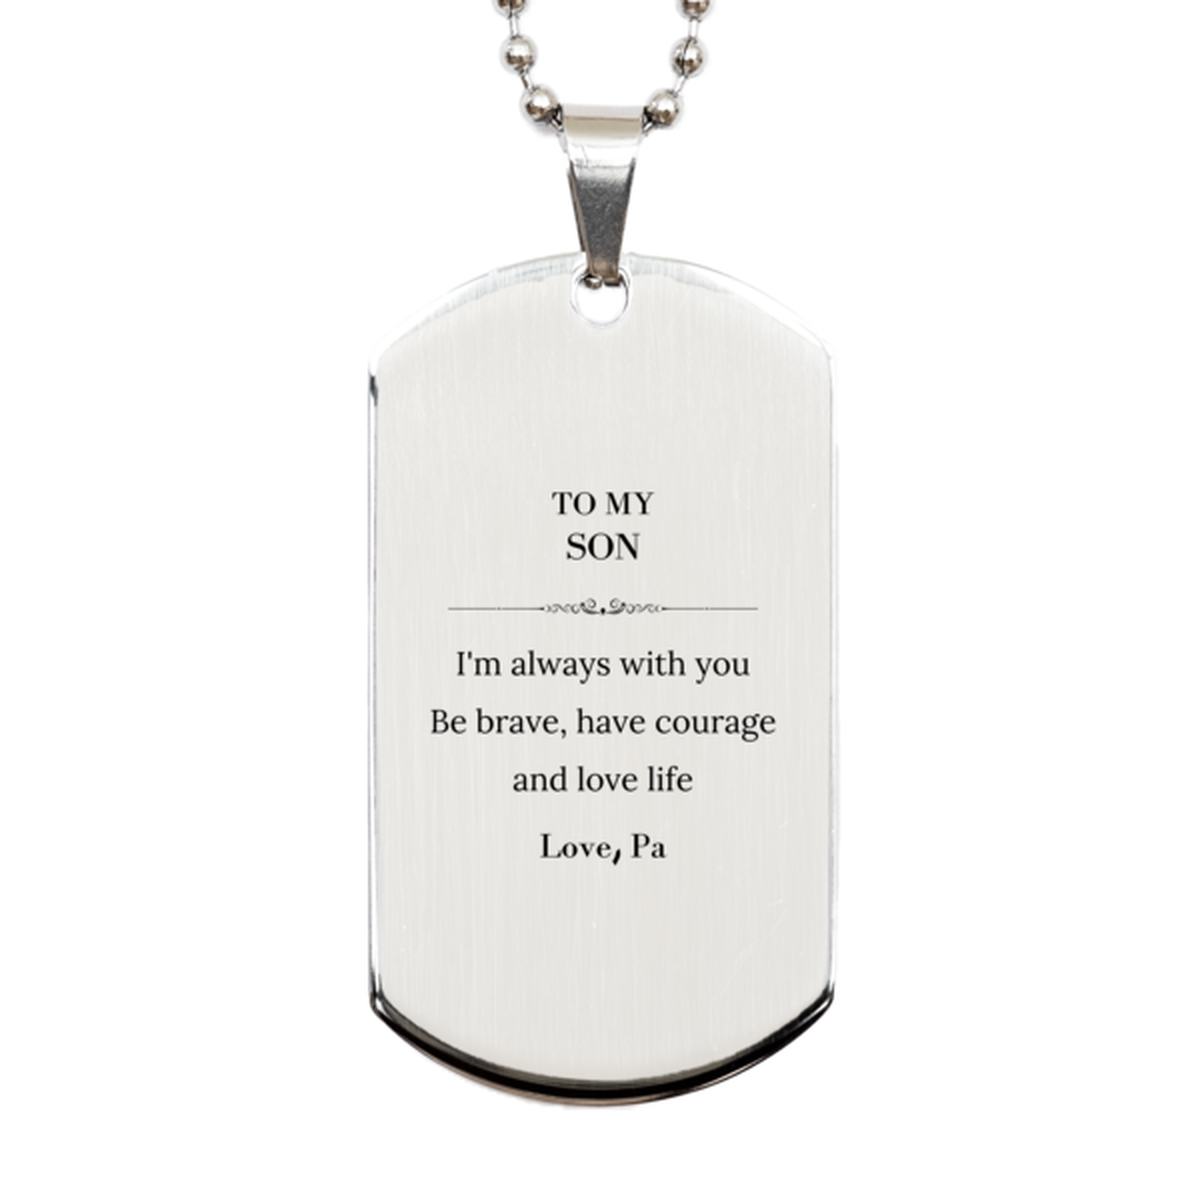 To My Son Gifts from Pa, Unique Silver Dog Tag Inspirational Christmas Birthday Graduation Gifts for Son I'm always with you. Be brave, have courage and love life. Love, Pa